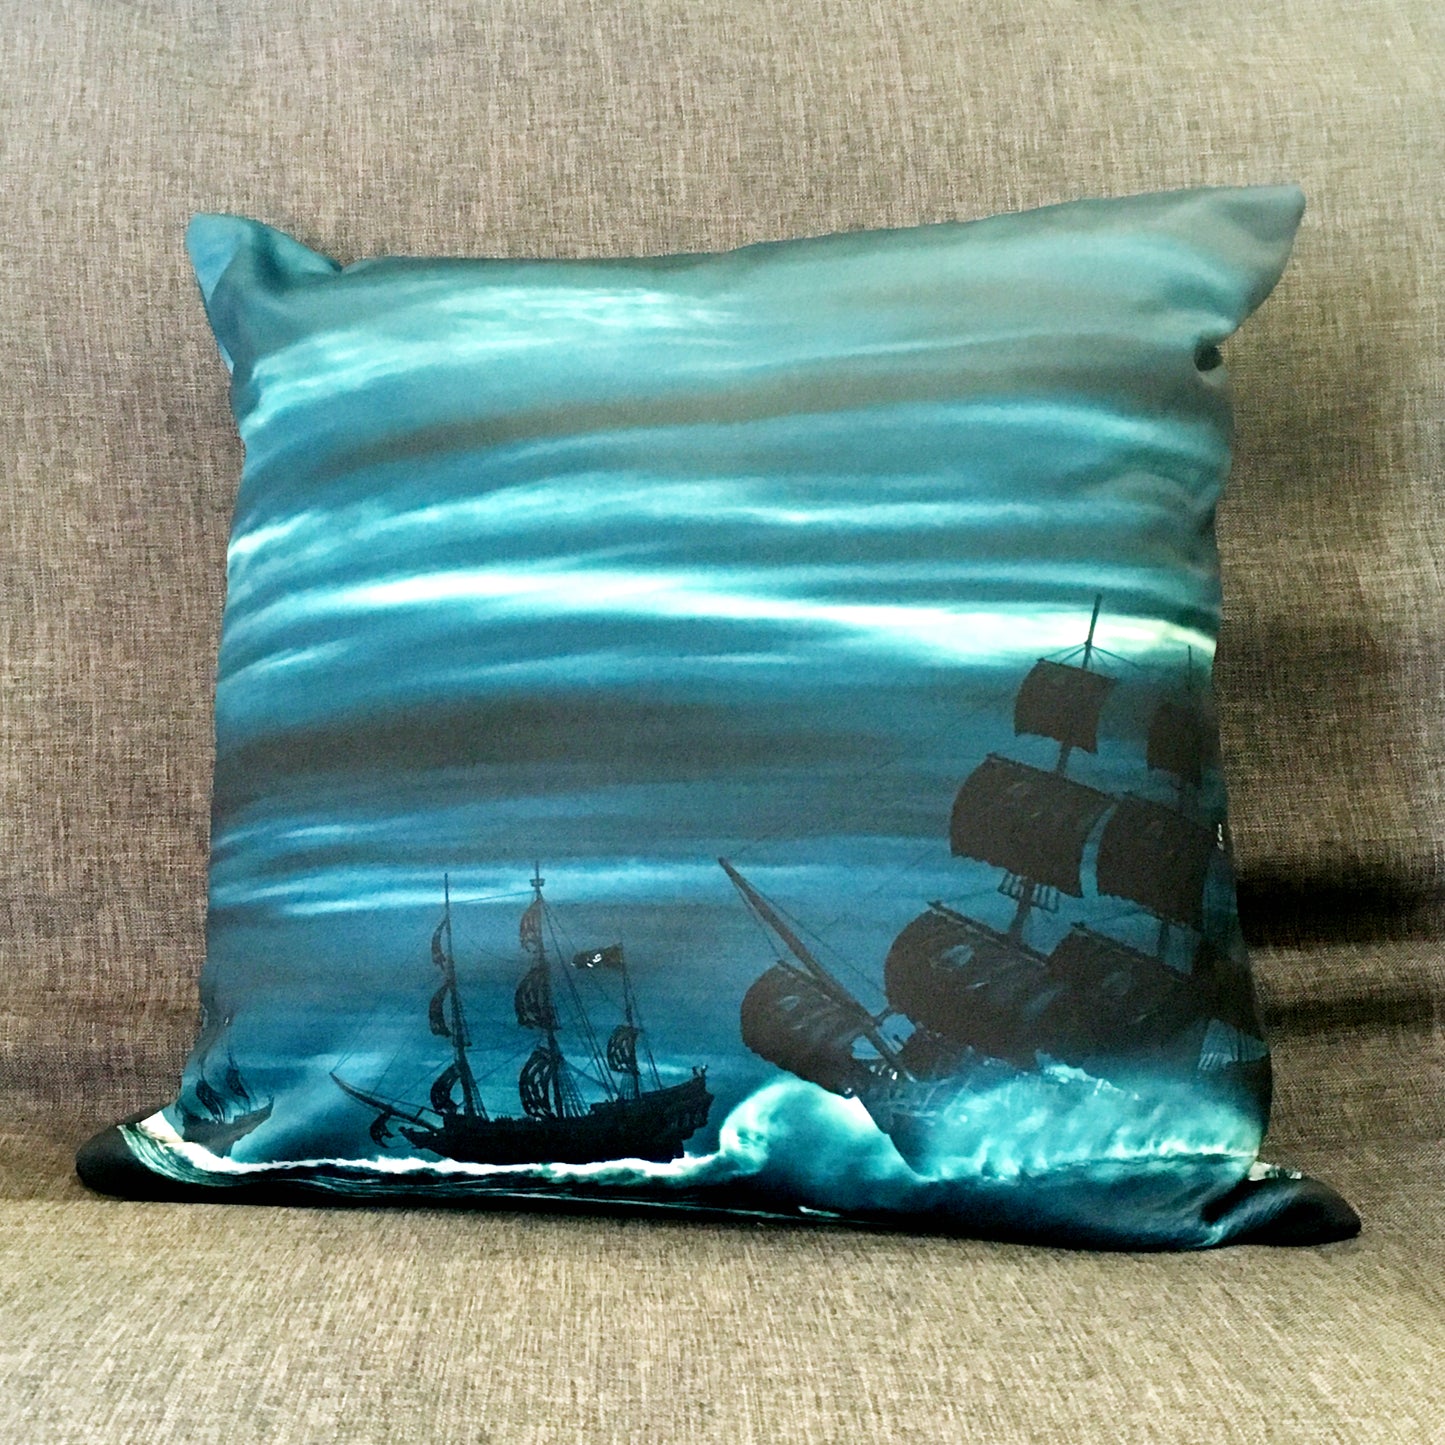 Blue, white, and black pirate ships on a square throw pillow